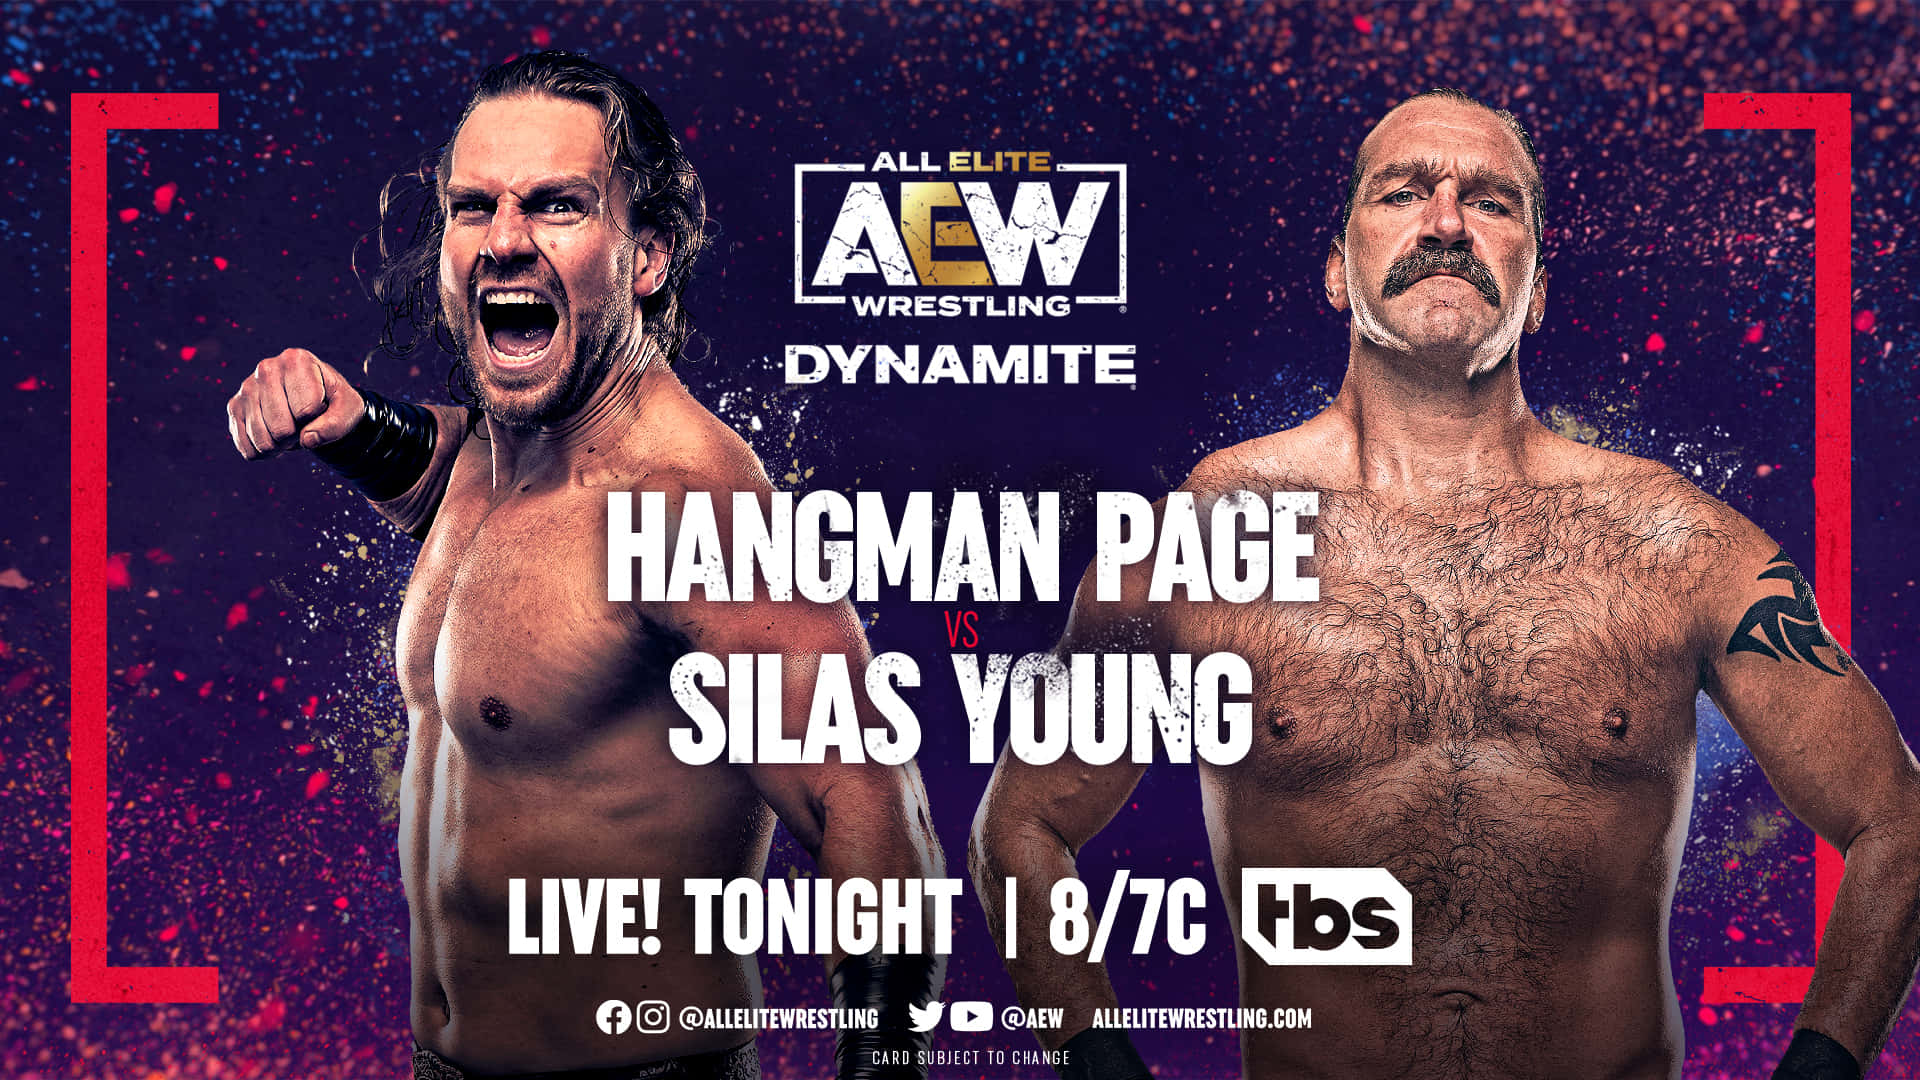 Adam side med Silas Young. Wallpaper